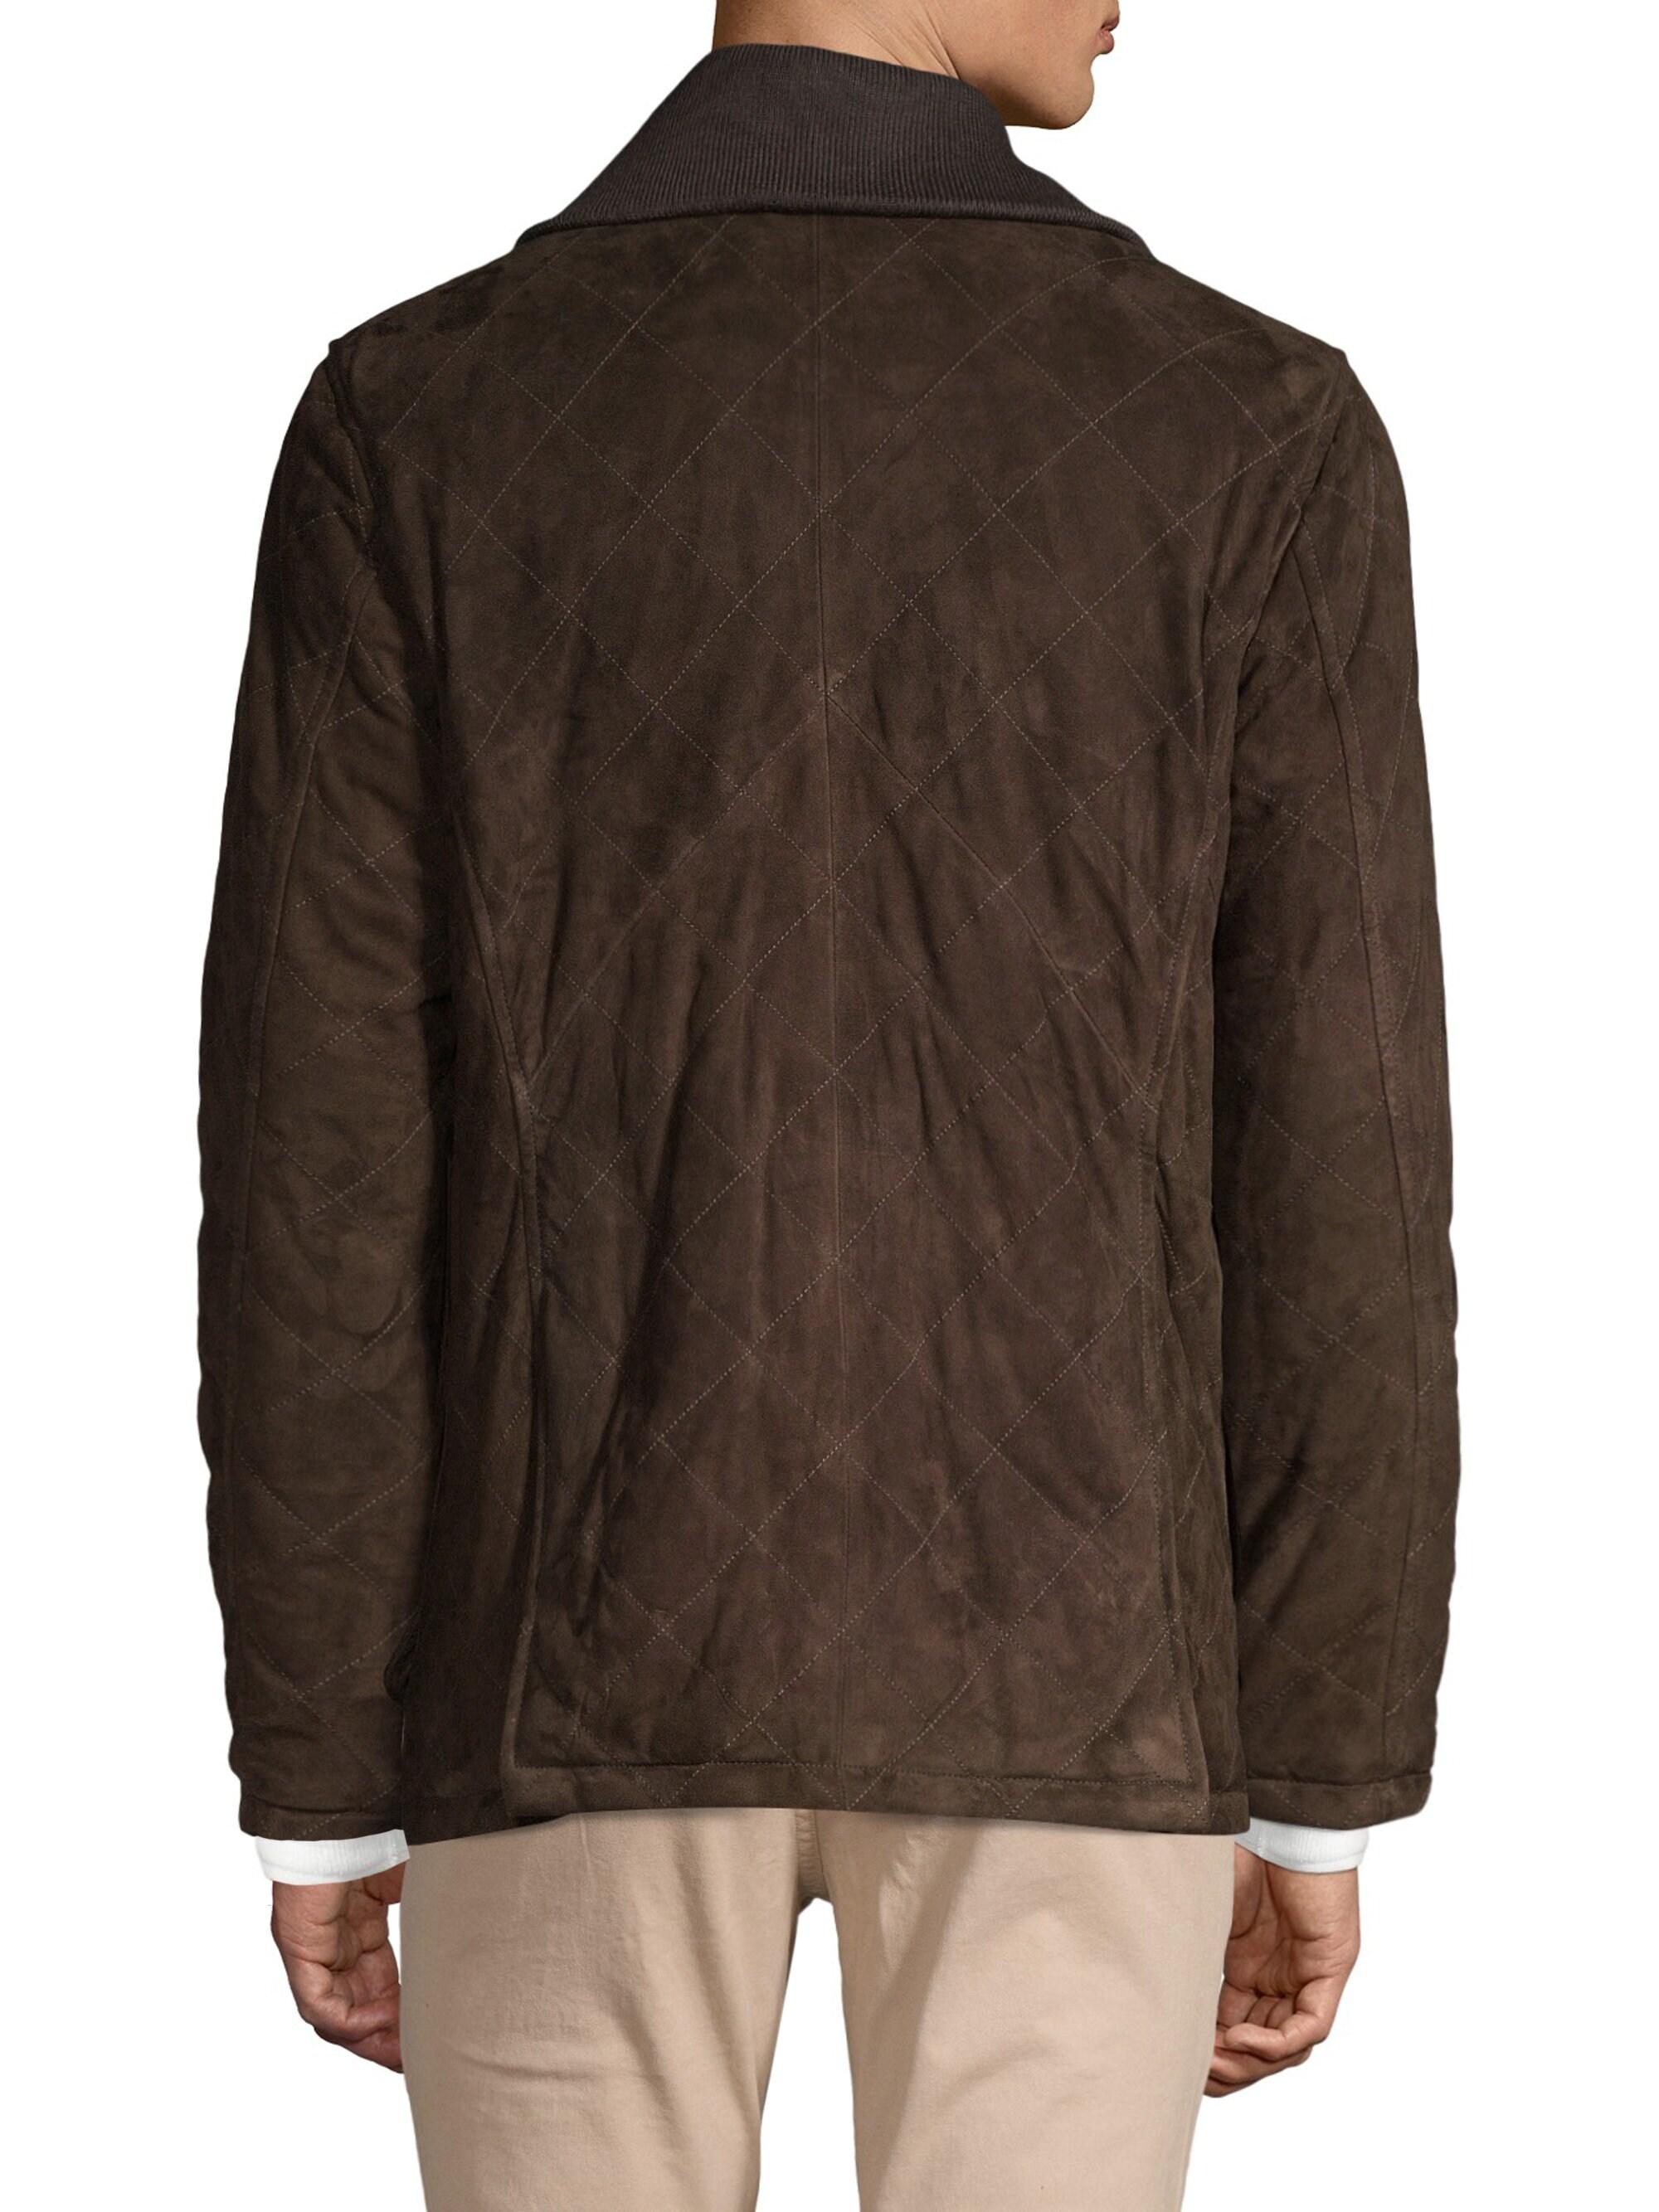 Isaia Diamond Quilted Utility Pocket Suede Jacket in Brown for Men - Lyst